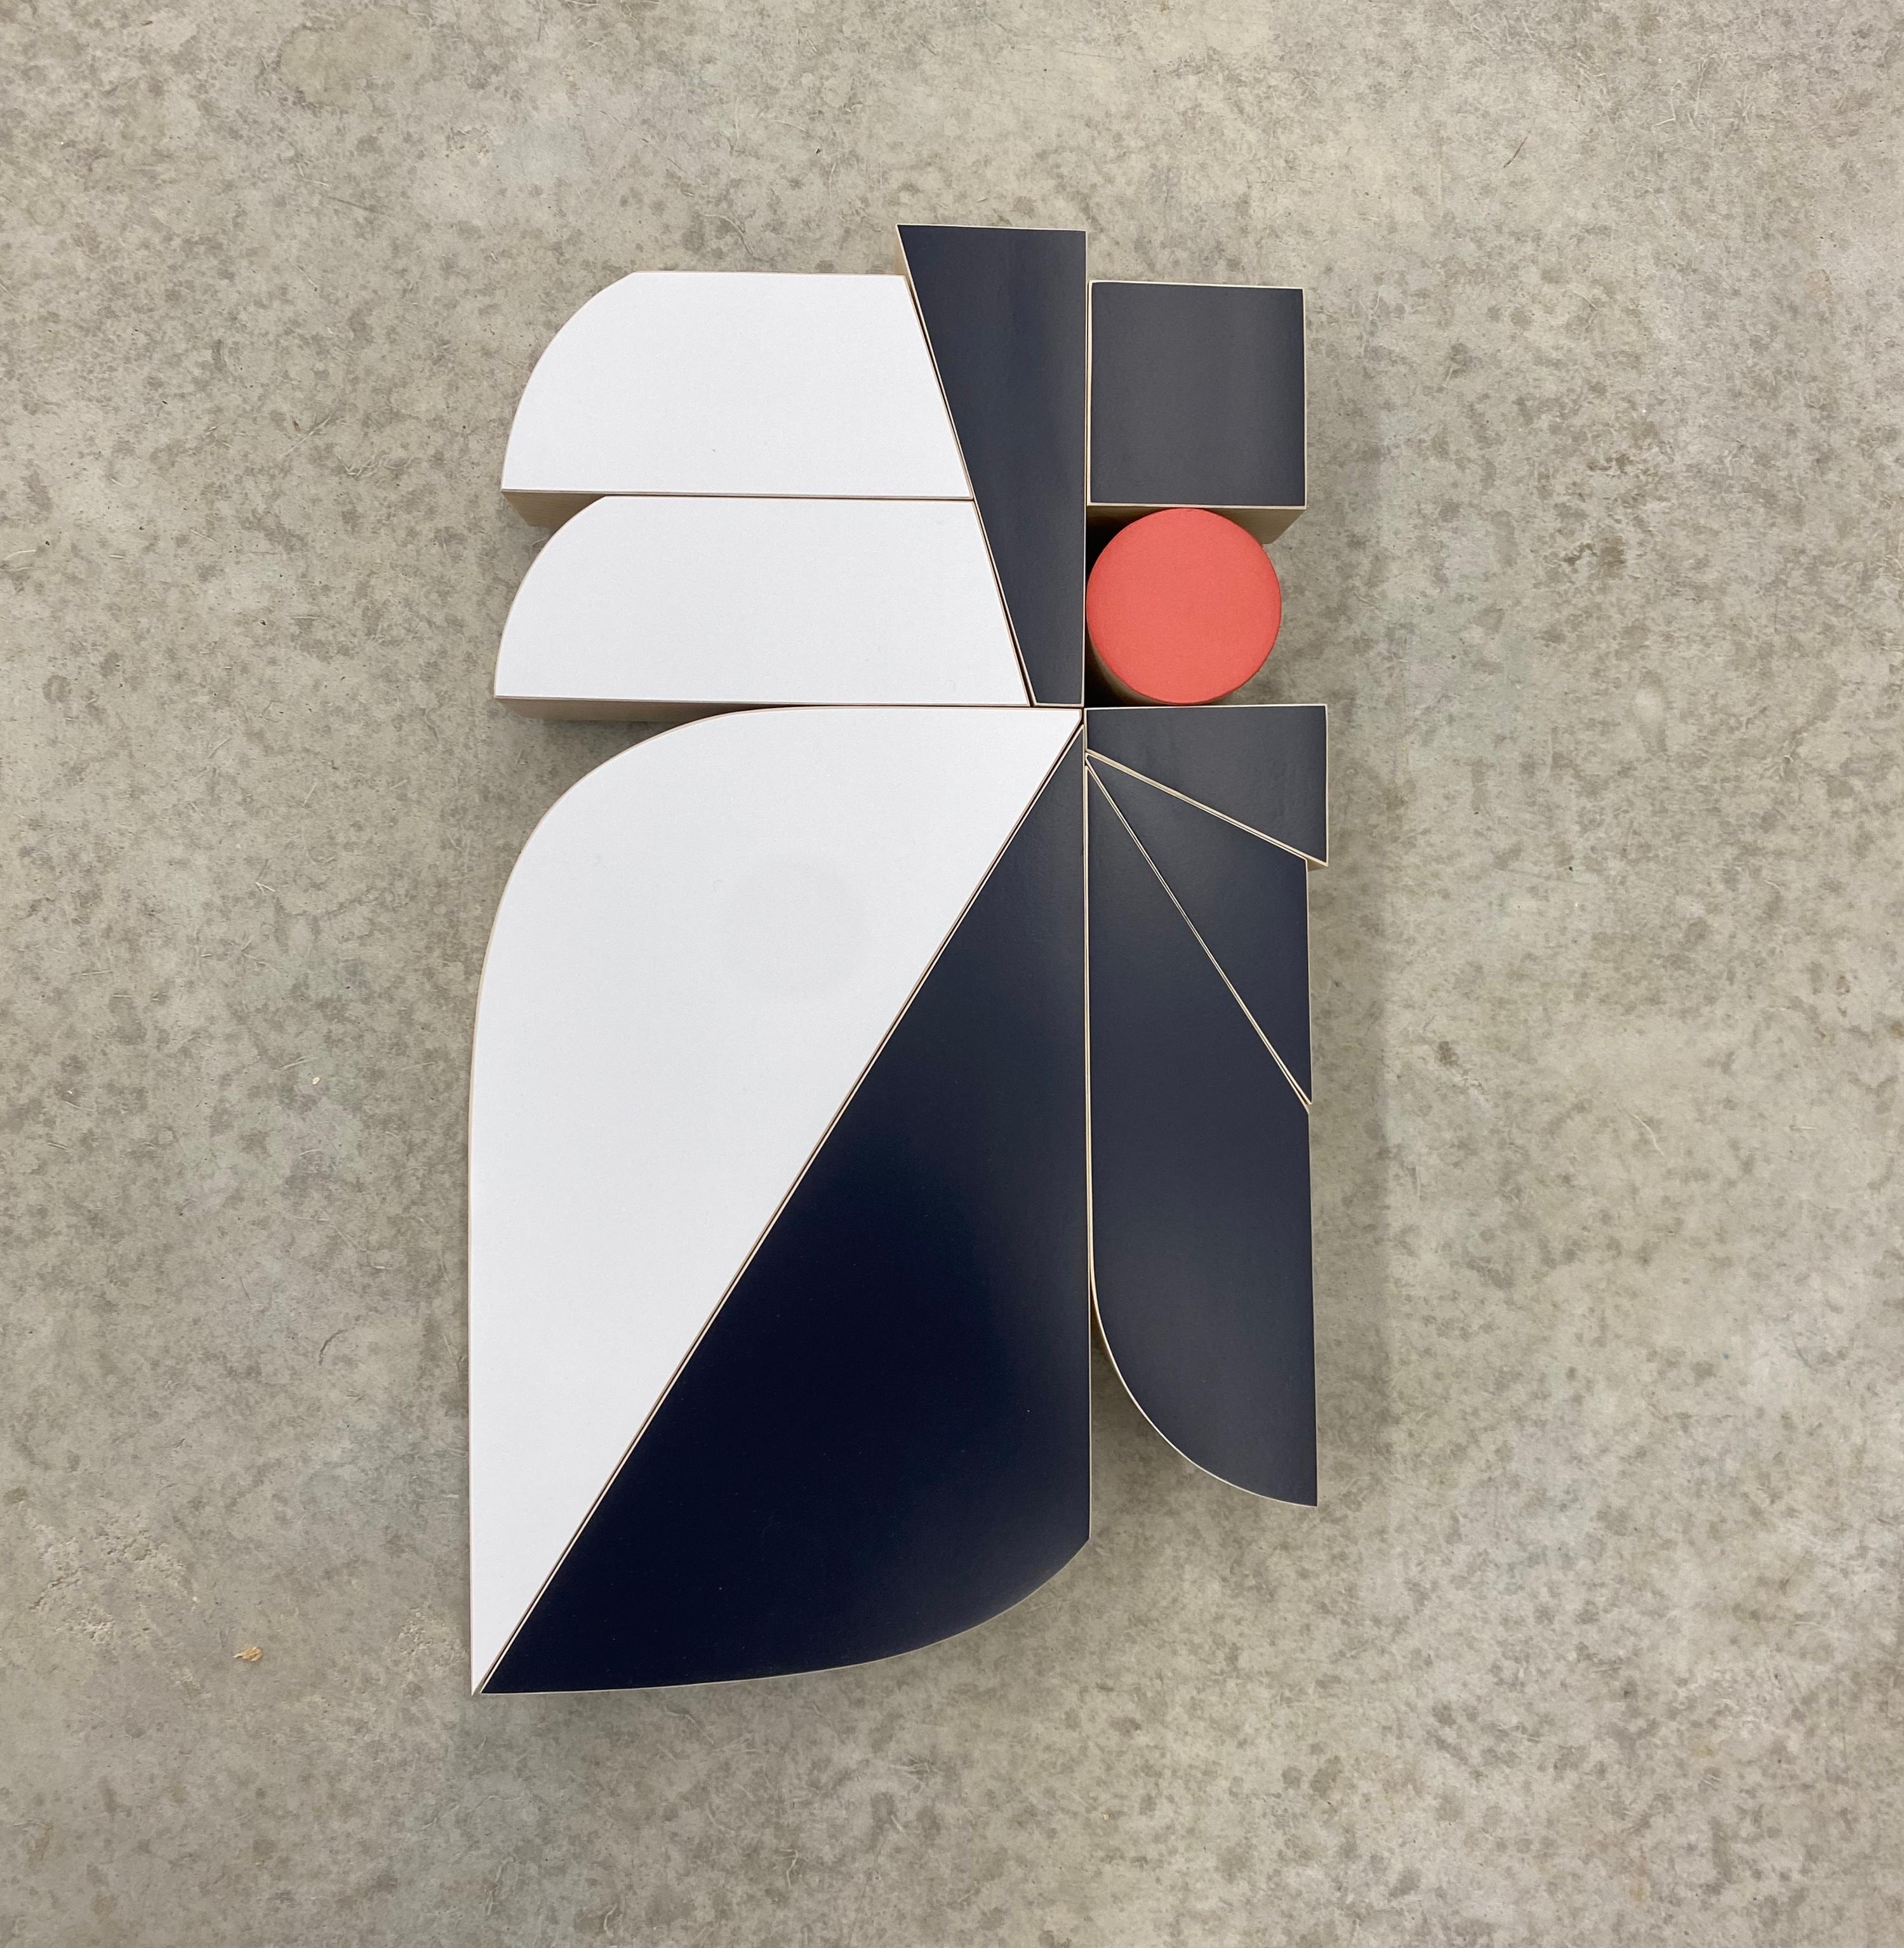 Pigmented satin lacquer on solid poplar

Small Pop series are minimalist driven, wood wall sculptures that are small and blocky and feature bright saturated colors. The pieces was inspired by my love for simple bold colors and modernist repeating